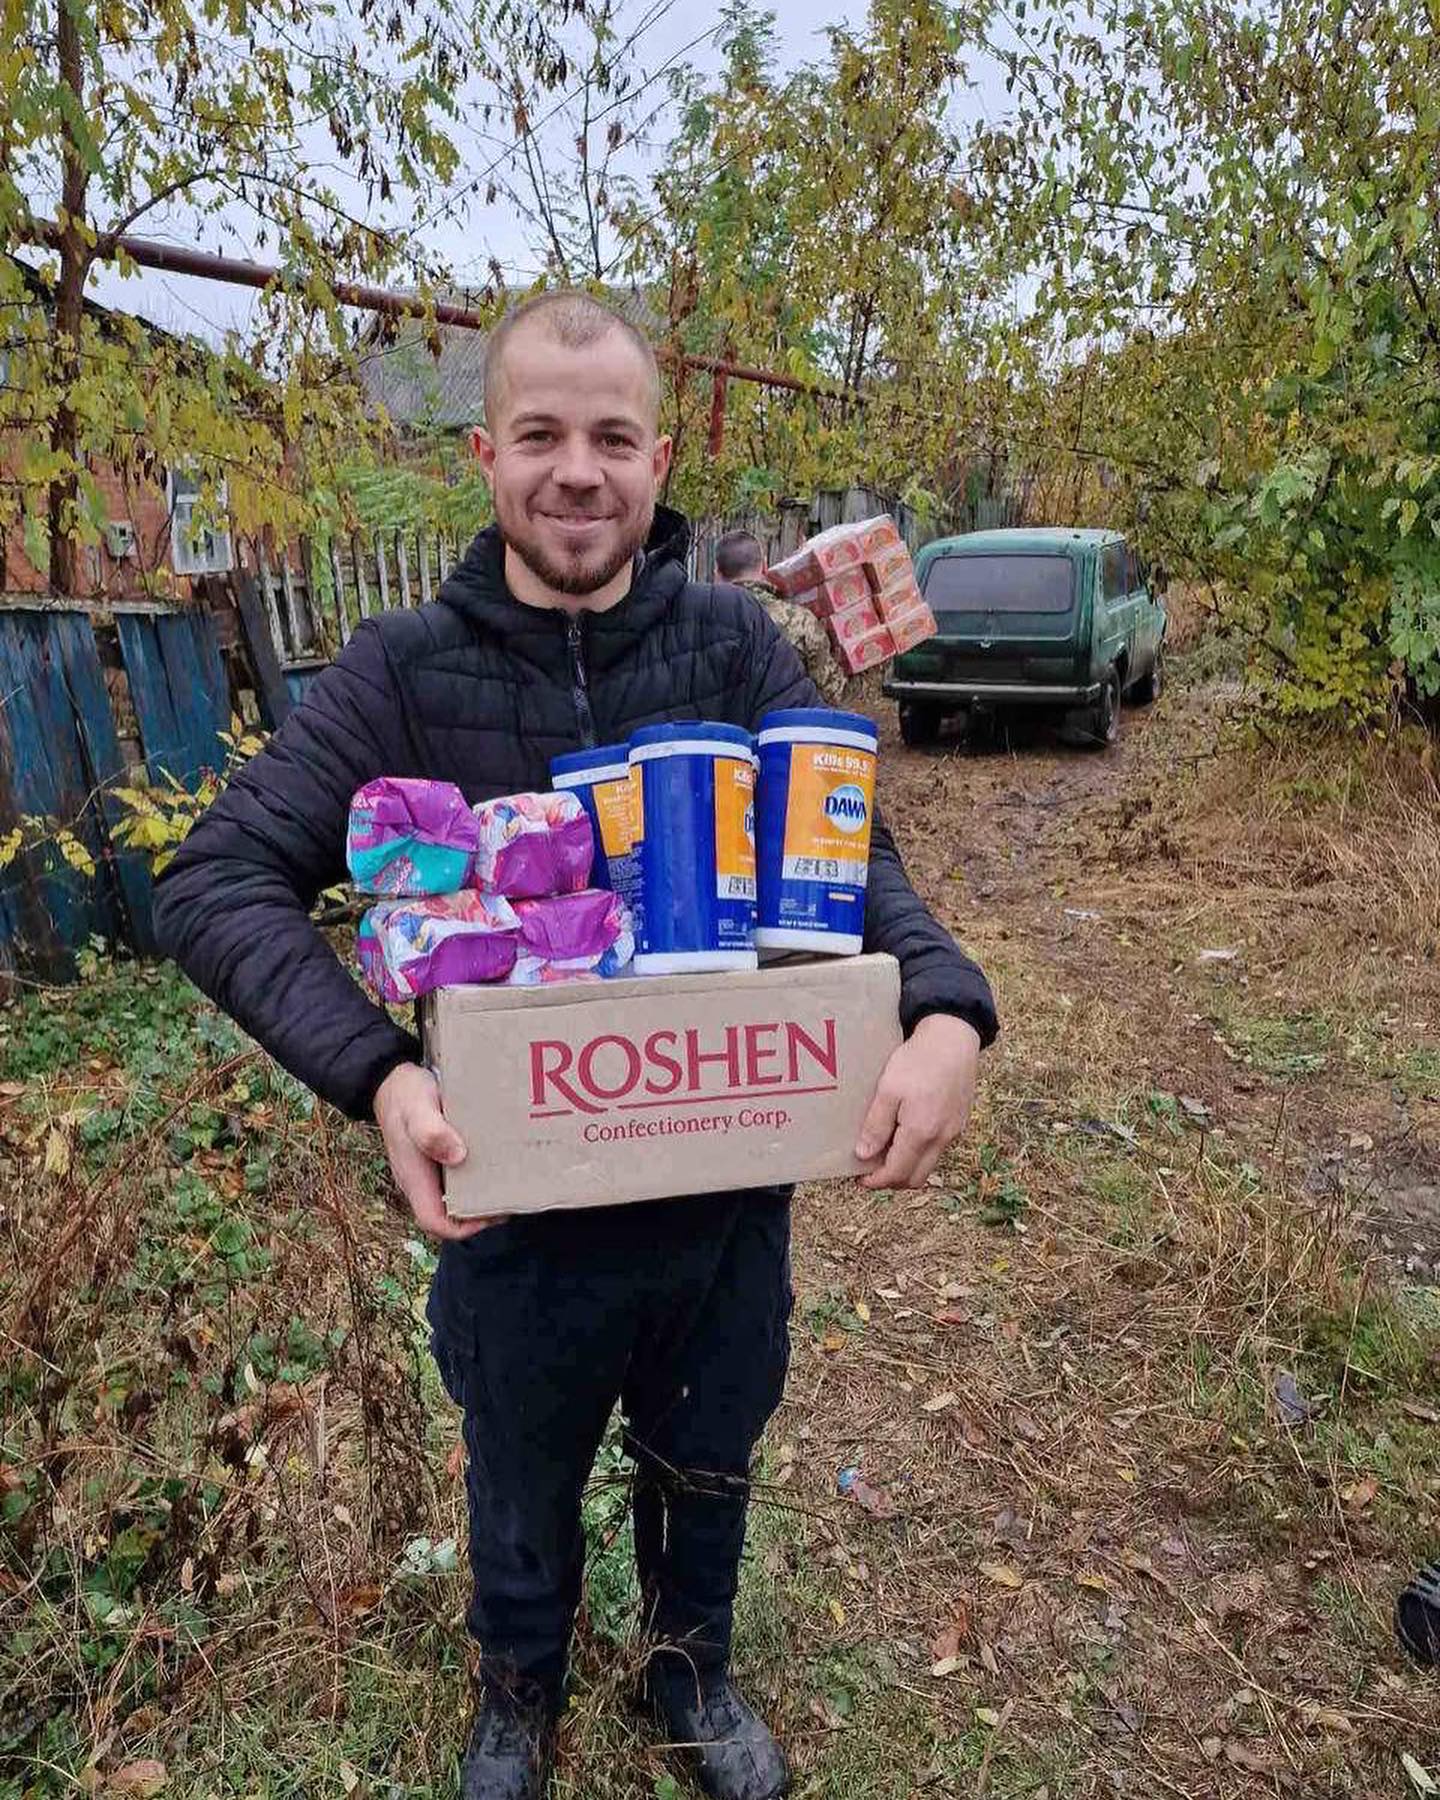 A man holding a box of toiletries in a yard.